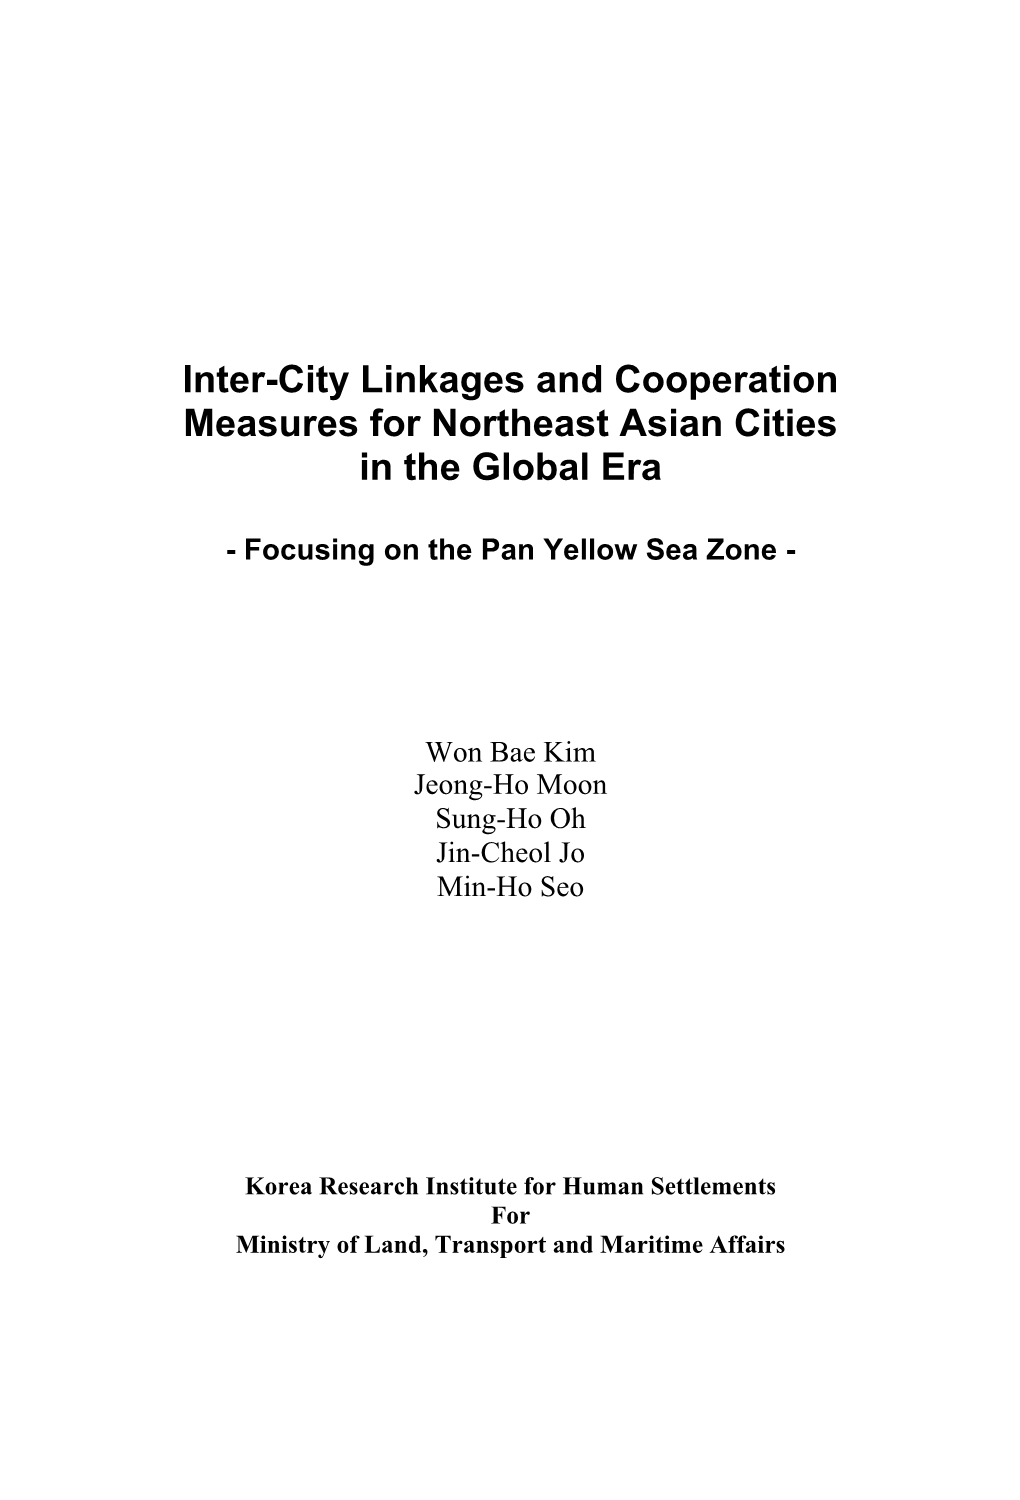 Inter-City Linkages and Cooperation Measures for Northeast Asian Cities in the Global Era